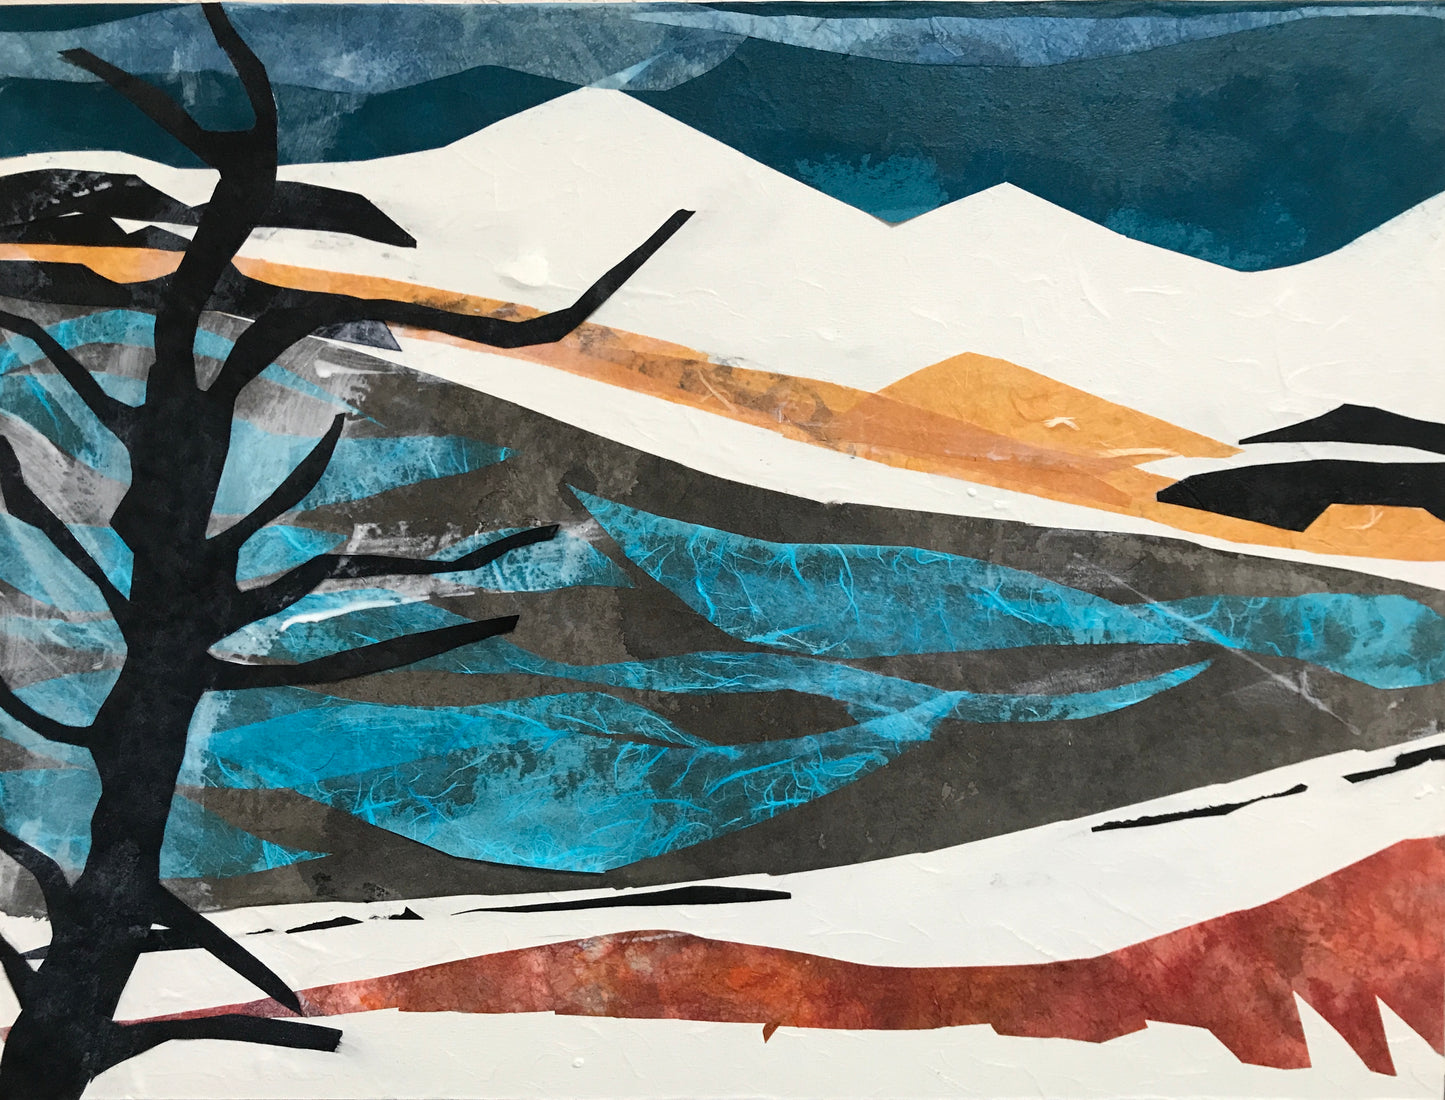 "Winter 7" by Kristen George Kavanagh. Mixed-media collage. 24" x 18".